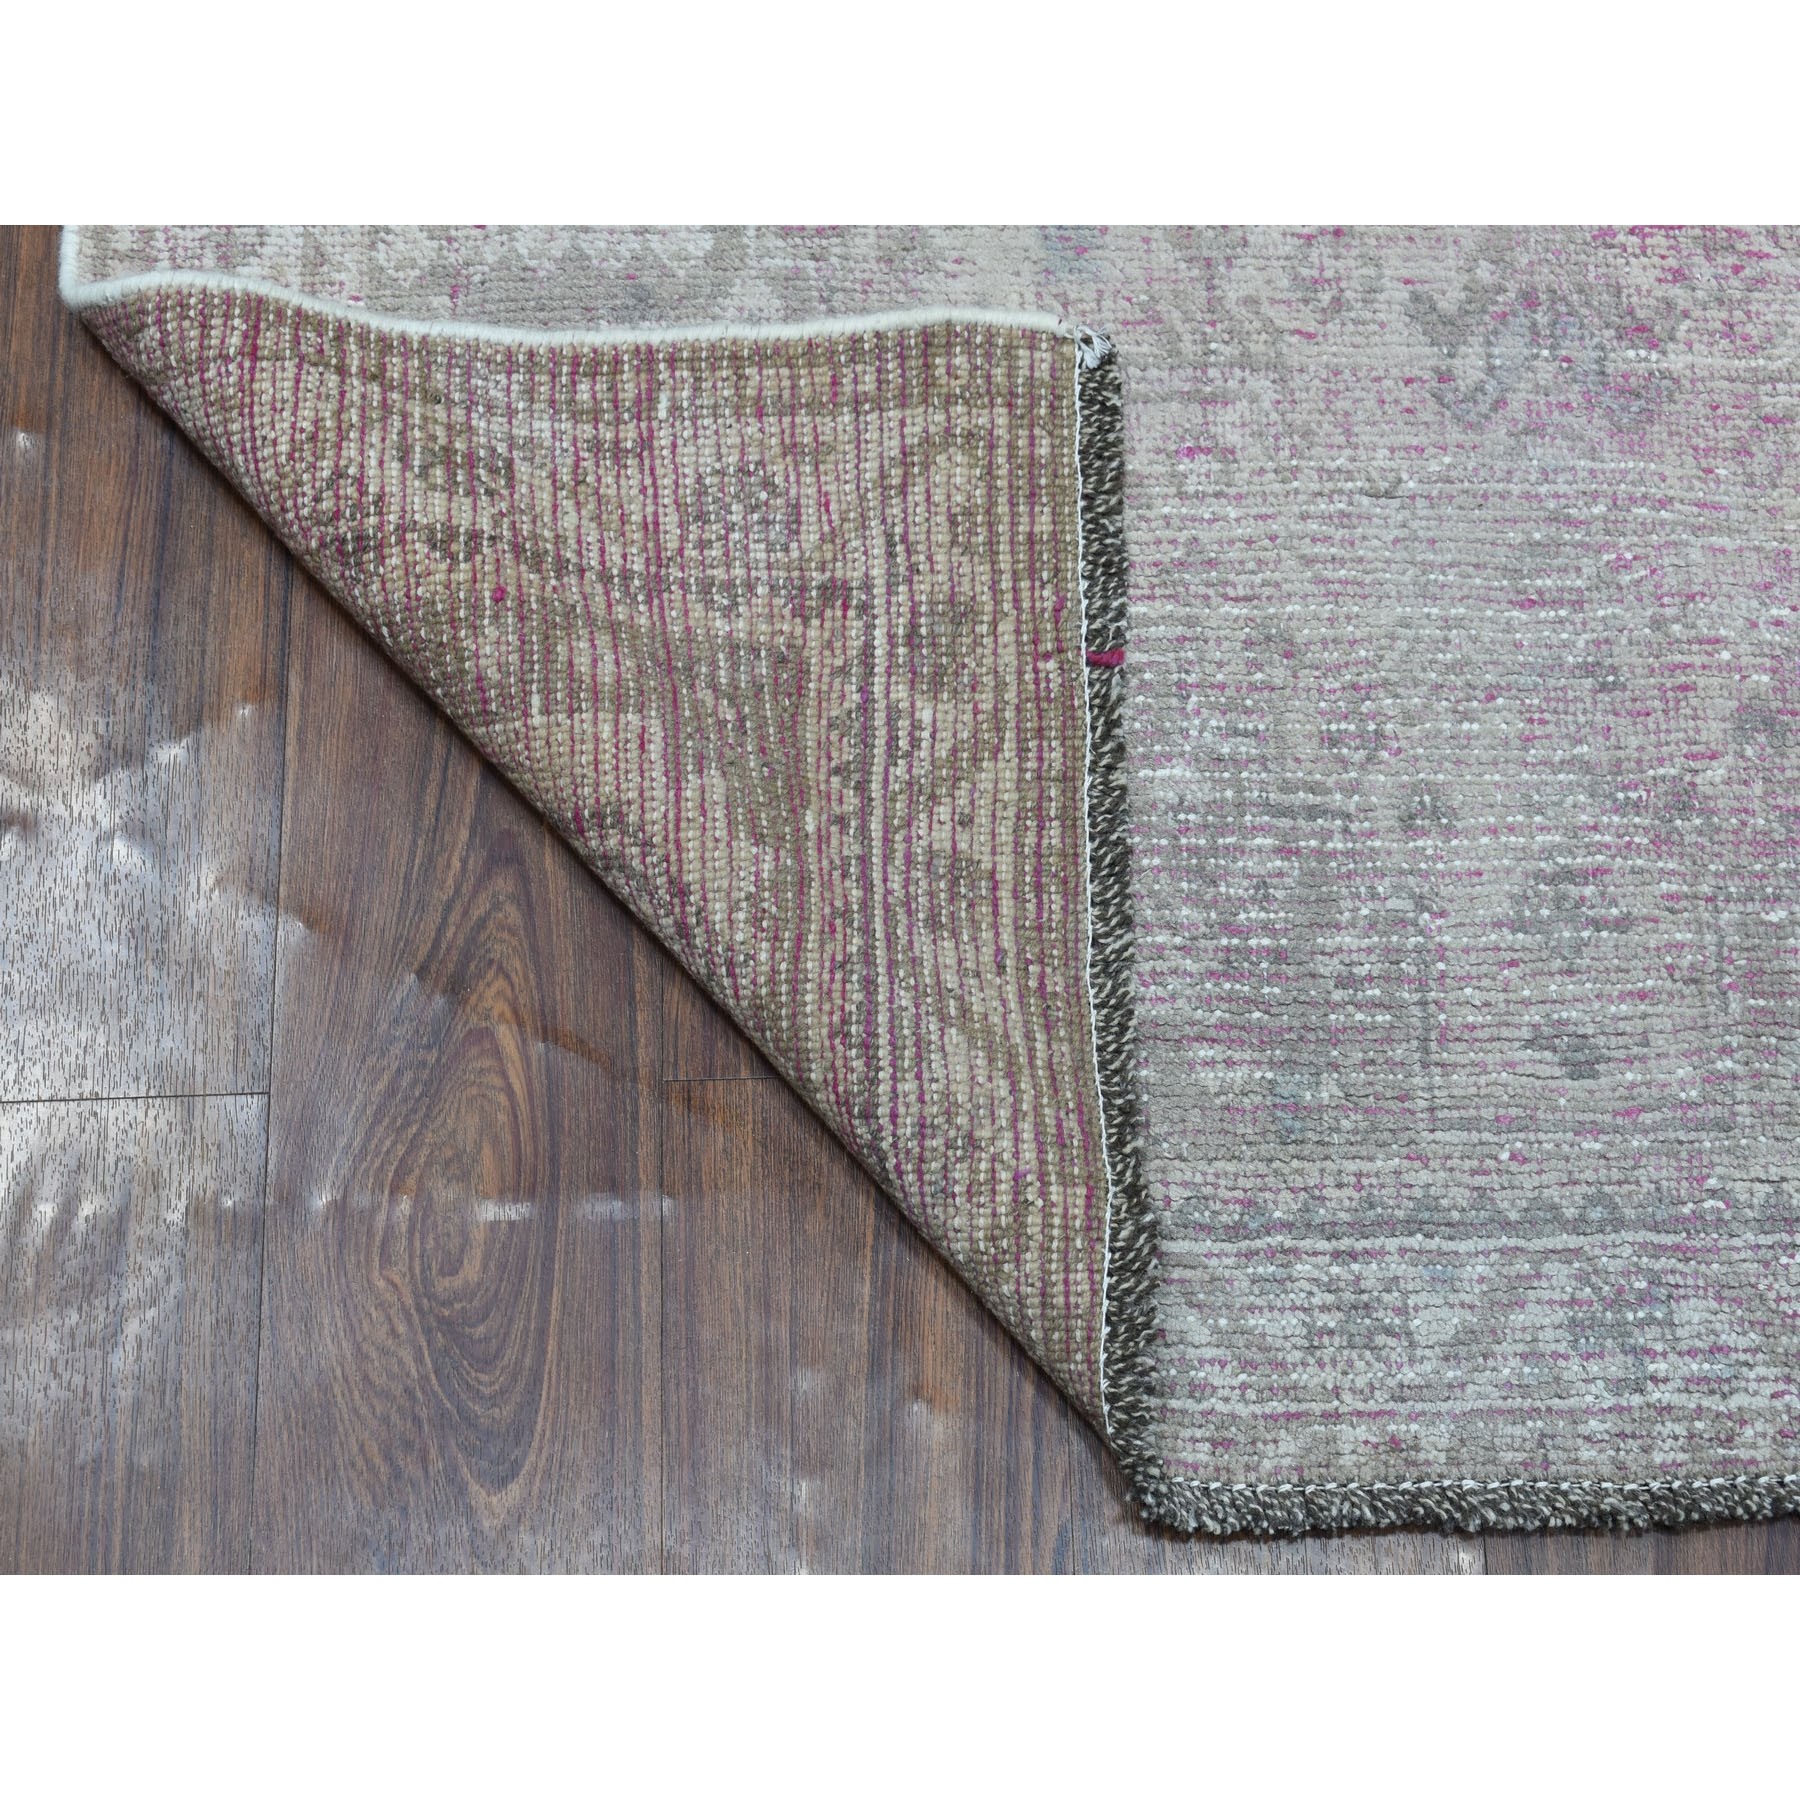 4-x11- Vintage And Worn Down Distressed Colors Persian Shiraz Wide Runner Hand Knotted Bohemian Rug 